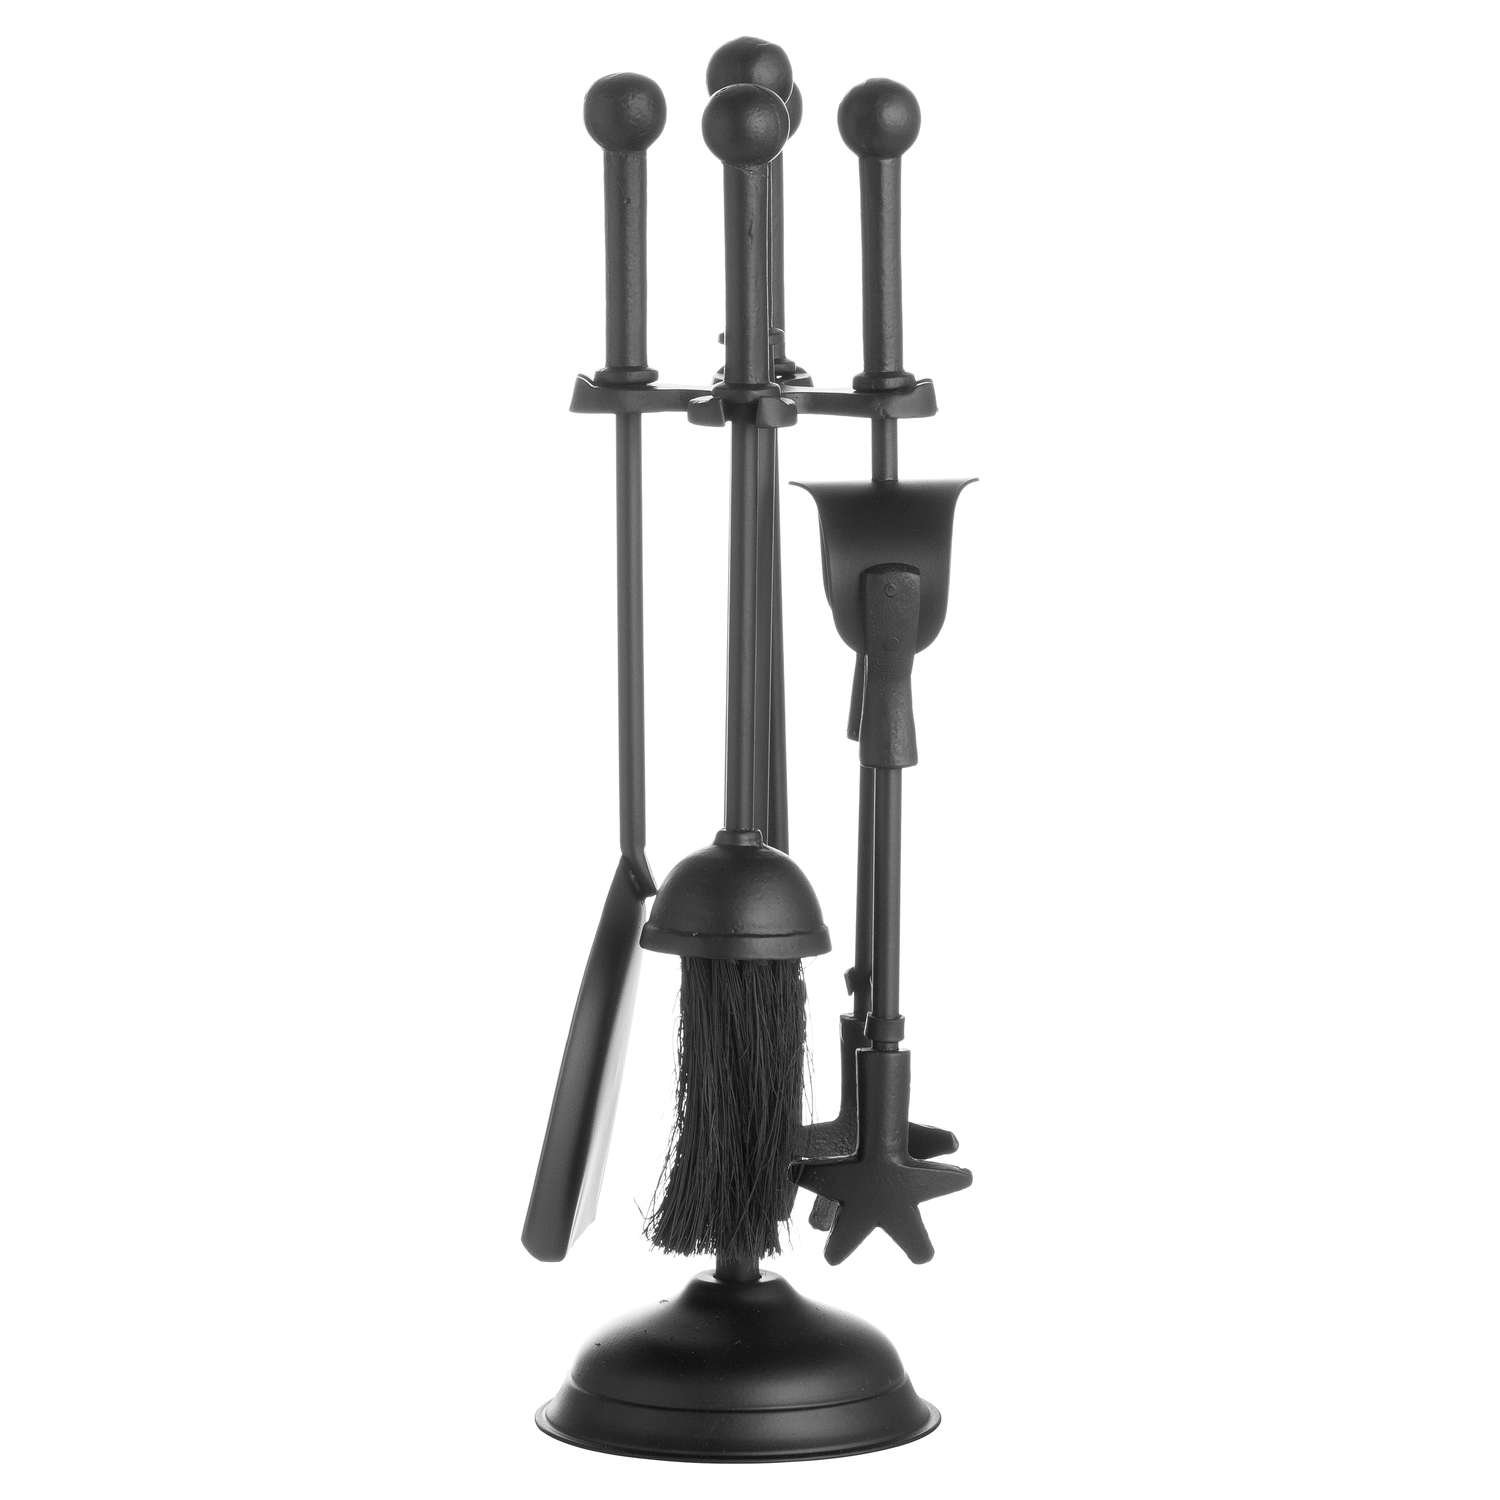 Ball Topped Companion Set In Black - Image 2